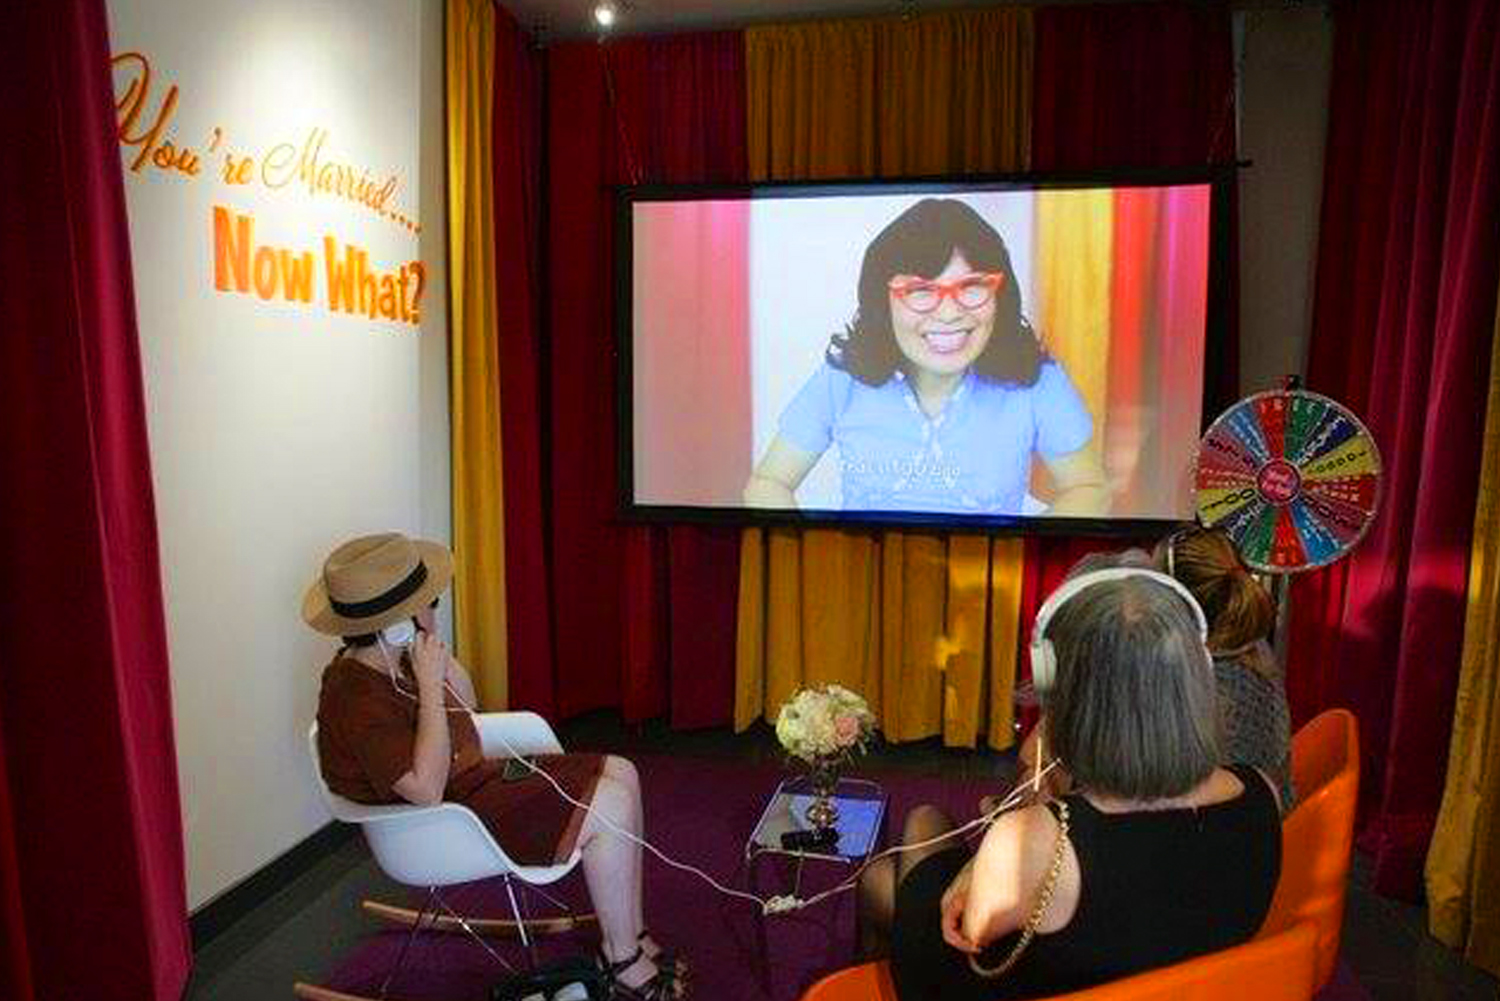 Yoshie Sakai, You’re Married…. Now What?, 2015. Single-channel video installation, 10’ x 10’ x 10’.